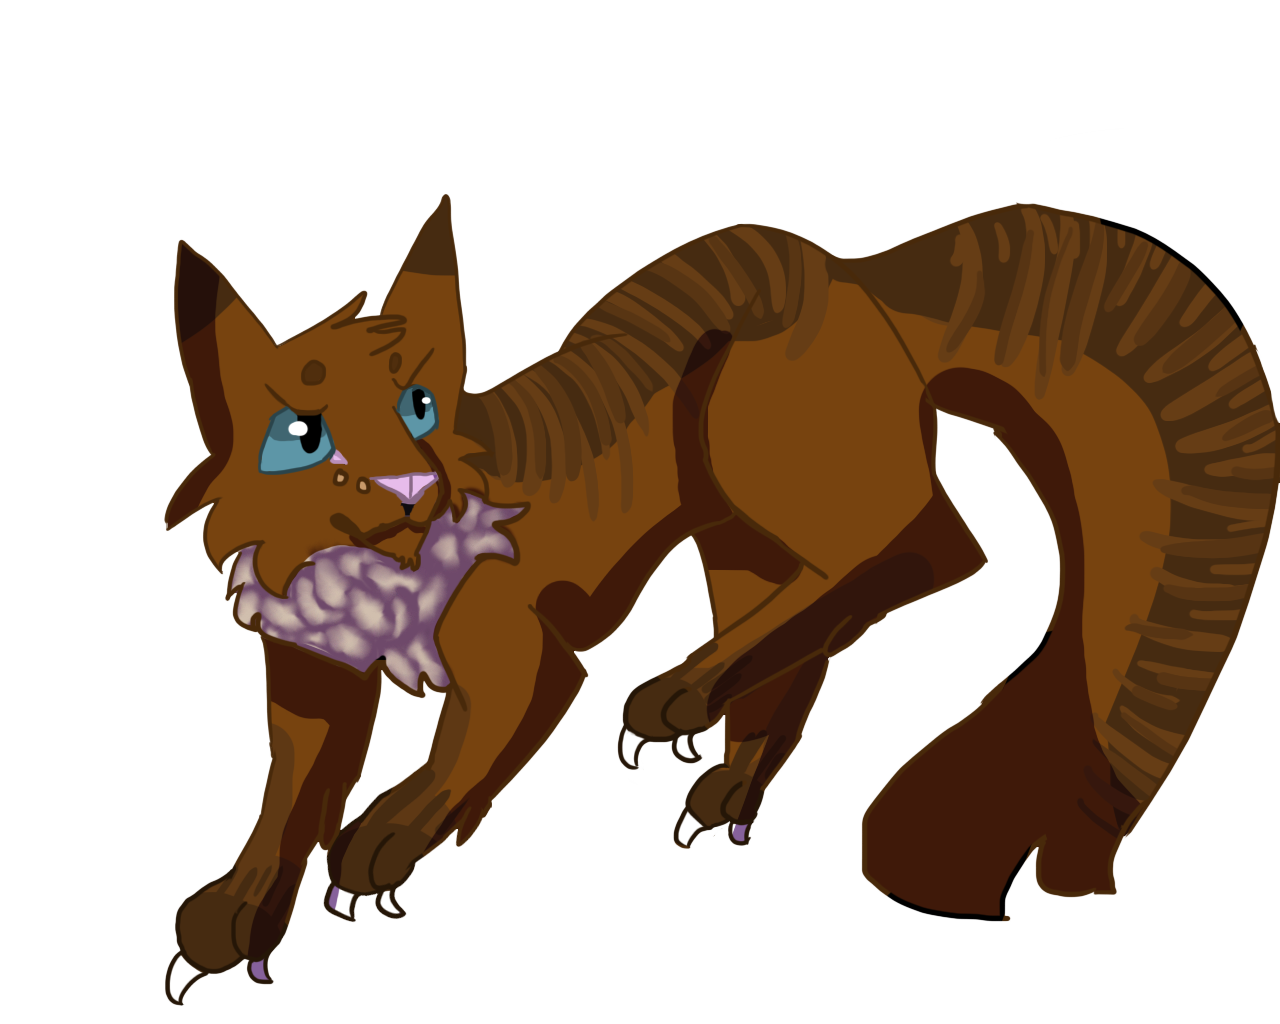 4. "Hawkfrost with Blue Hair" by Tumblr - wide 6